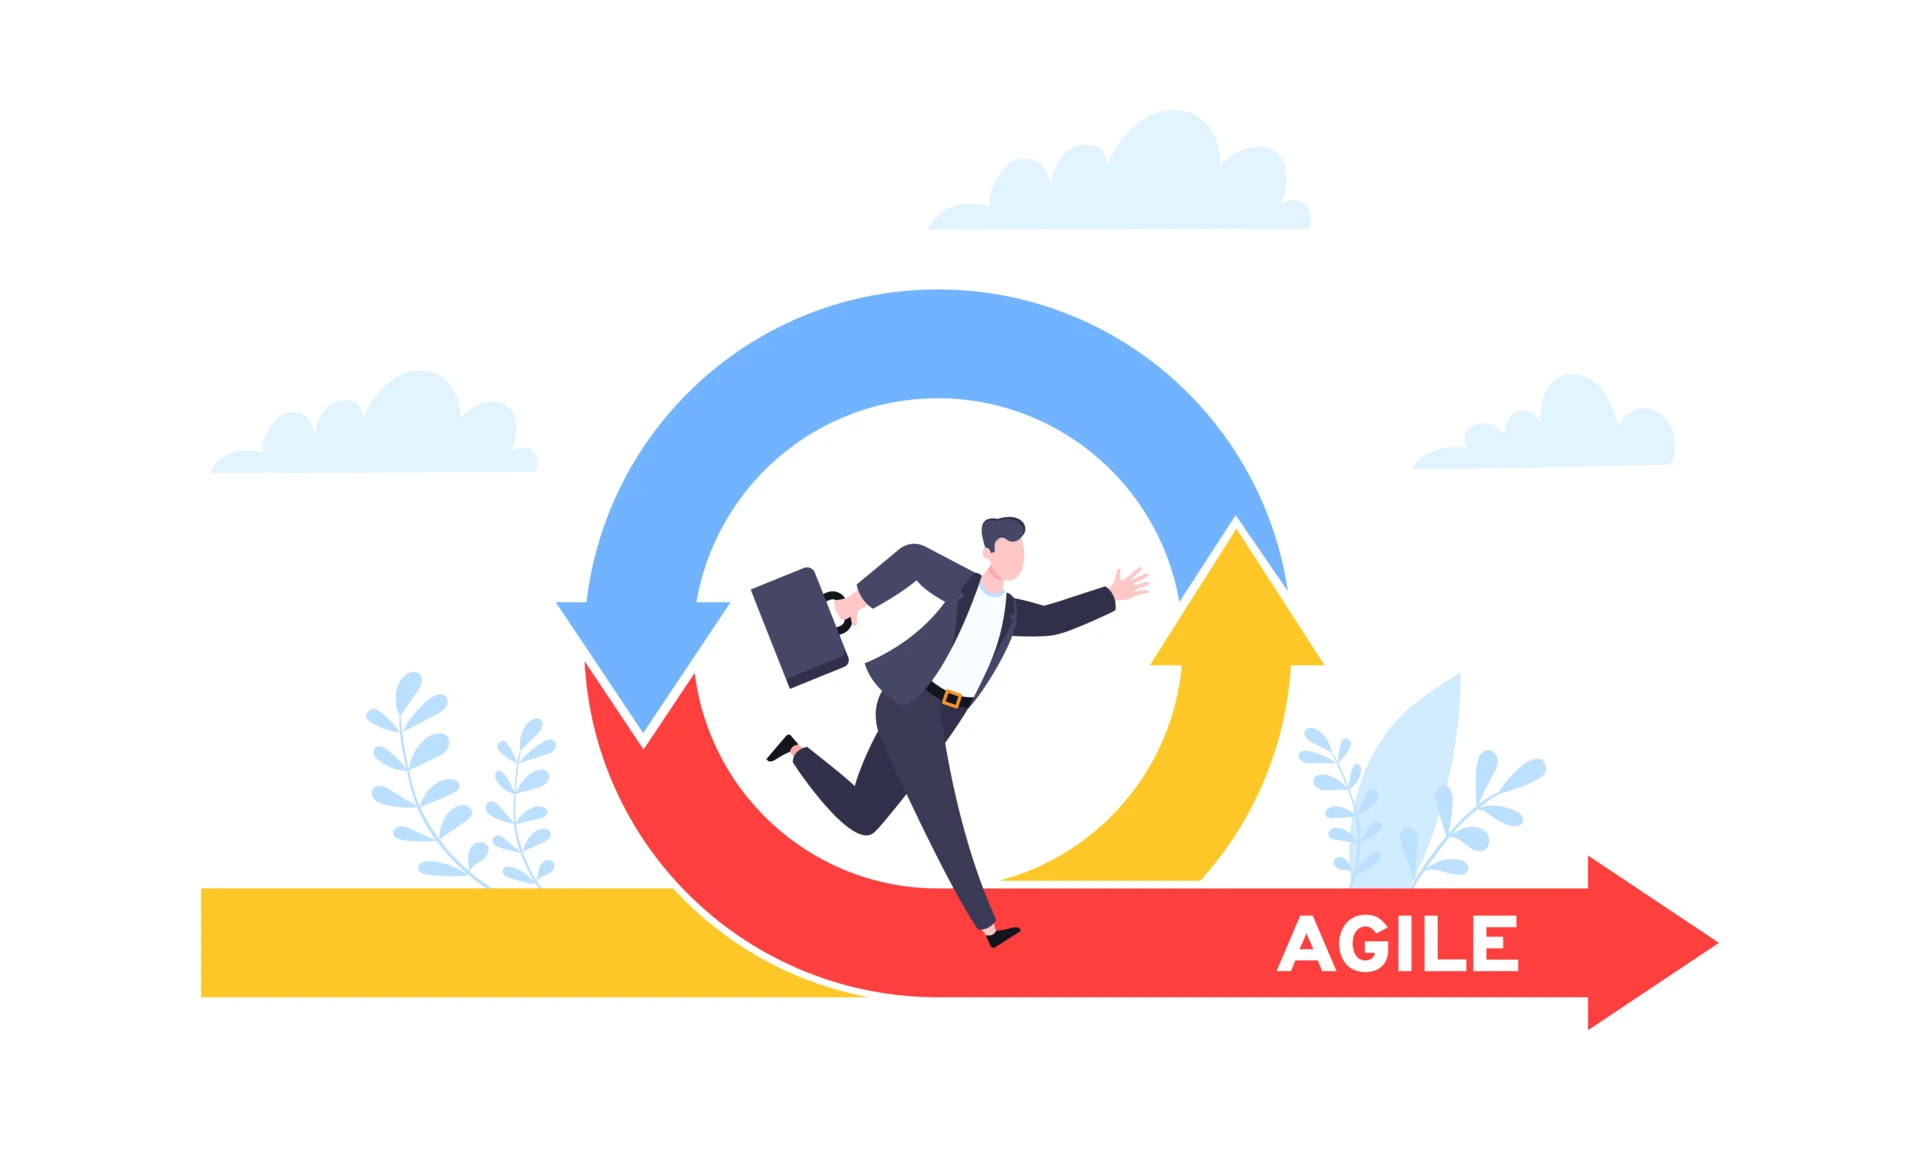  Learn how to manage agile sprints with Pronnel.